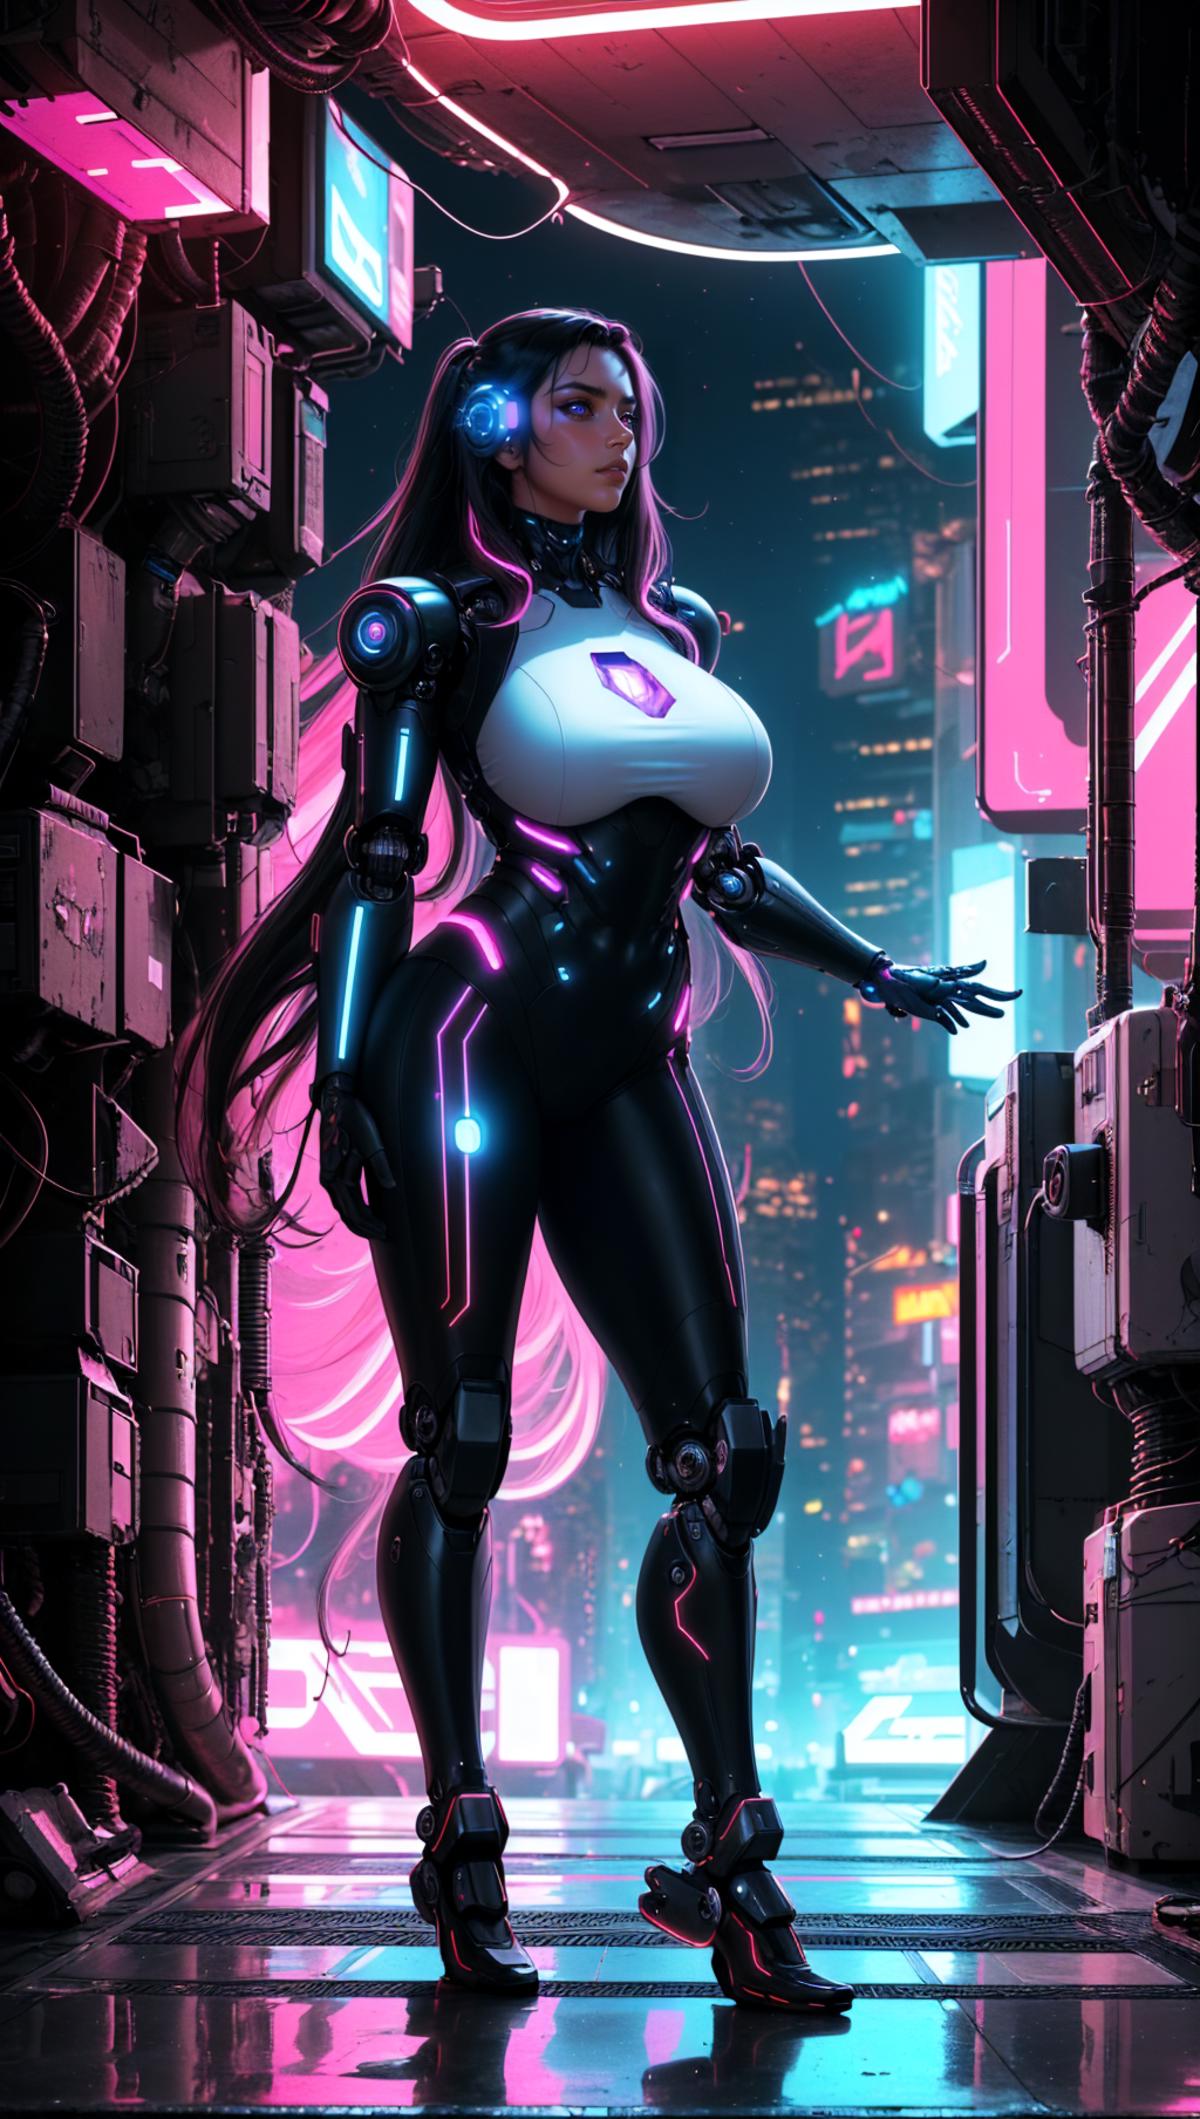 Pink and Purple Anime Cityscape with a Robotic Woman.